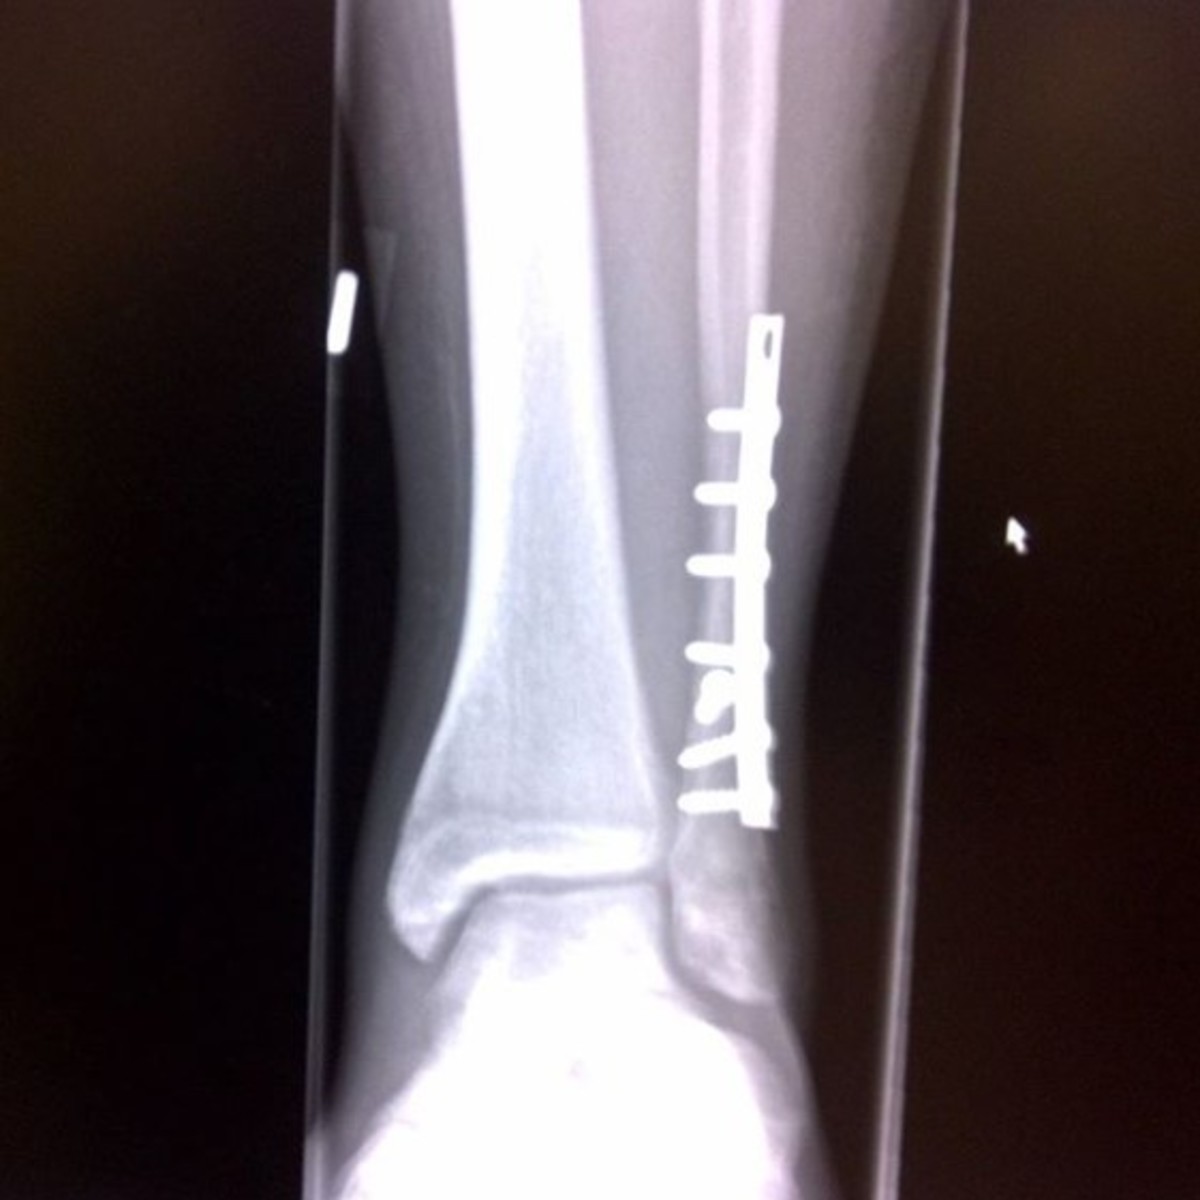 My surgically repaired ankle with a titanium plate and seven screws. 